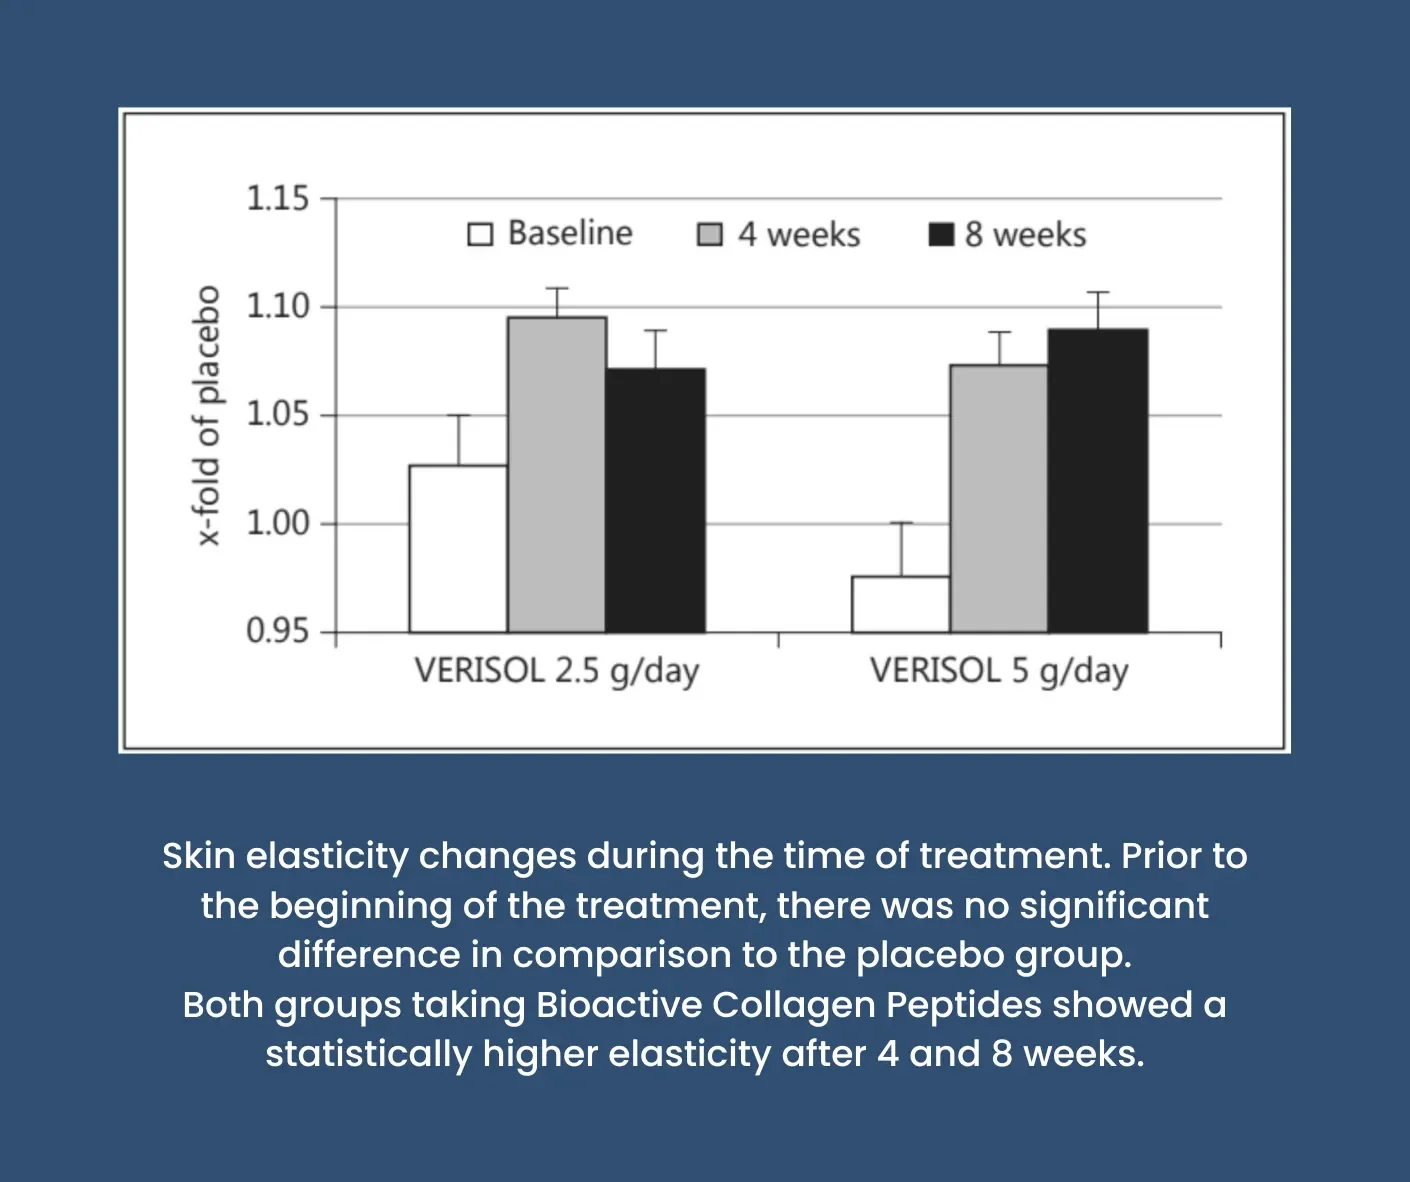 Line graph showing the improvement in skin elasticity from participants taking either 2.5 or 5 grams of VERISOL Bioactive Collagen Peptides per day for 4 and 8 weeks.